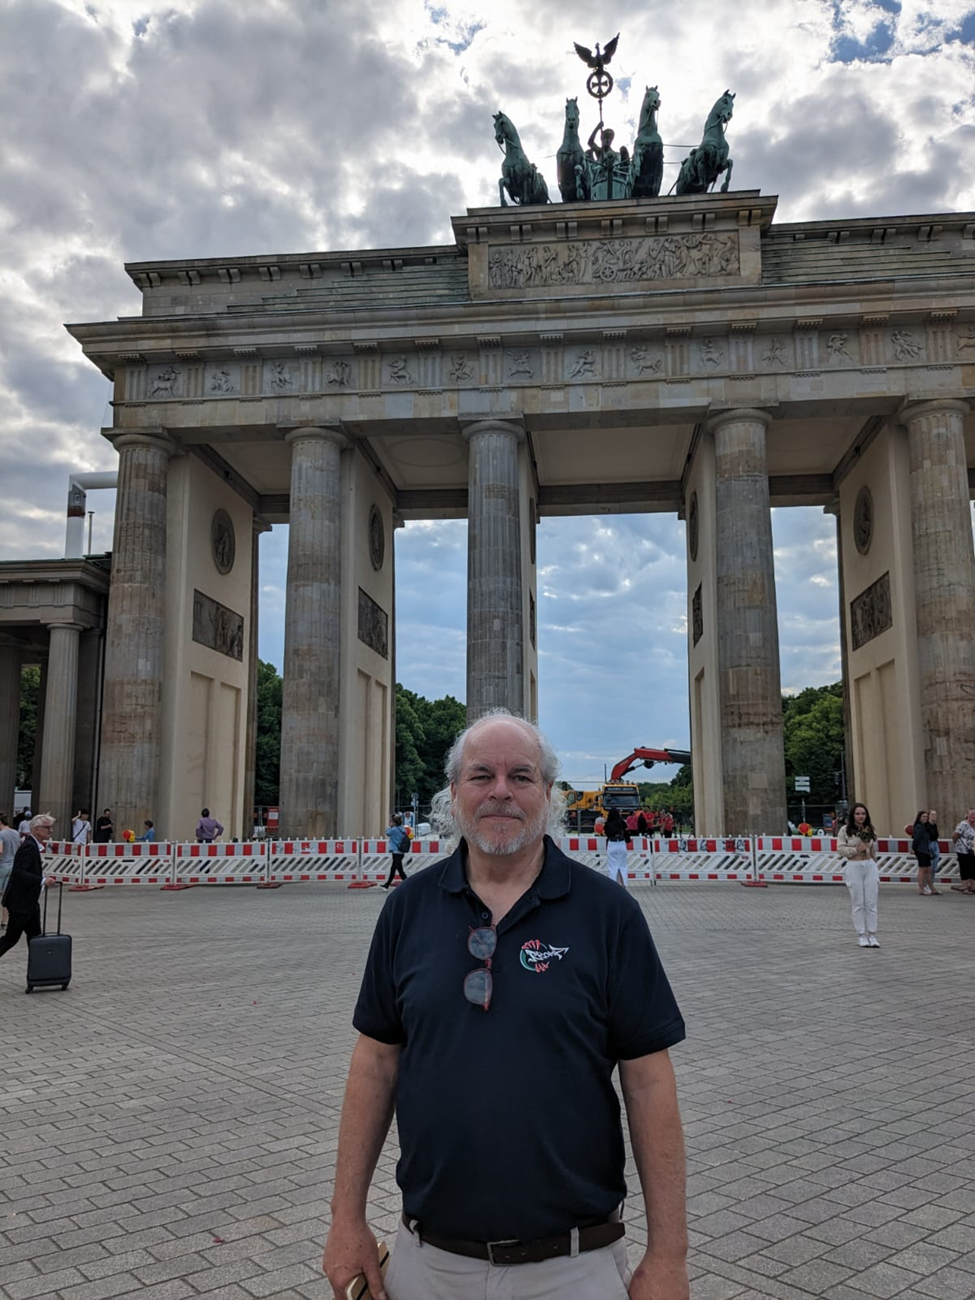 Man standing in front of a large stone pillared gate structure in Berlin Germany